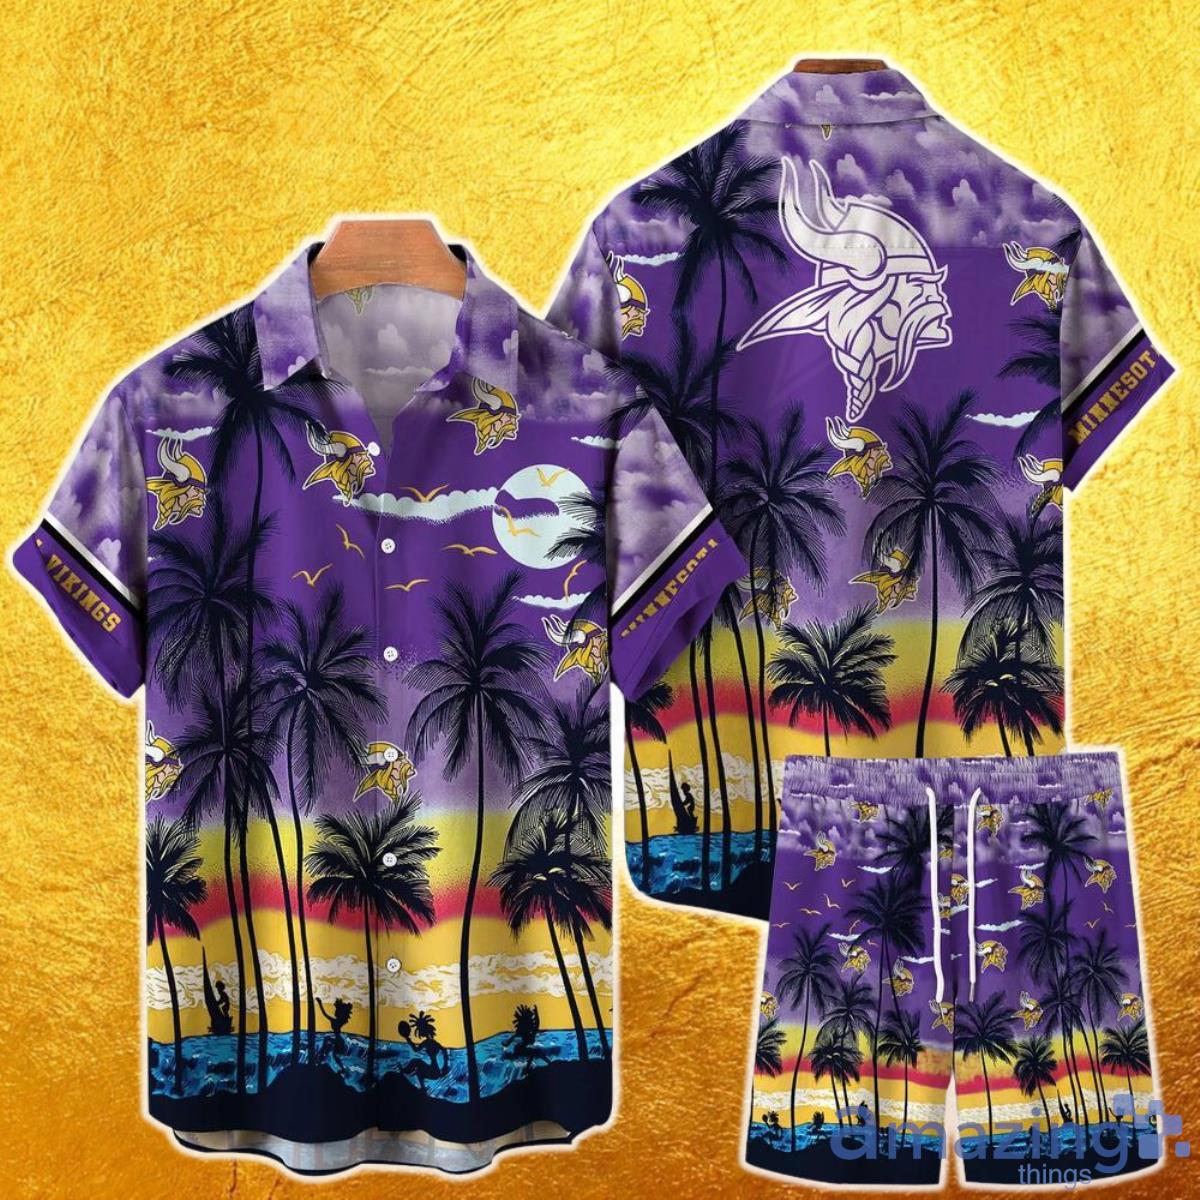 Minnesota Vikings NFL Hawaiian Shirt And Short Tropical Pattern This Summer Shirt New Gift For Best Fan Product Photo 1